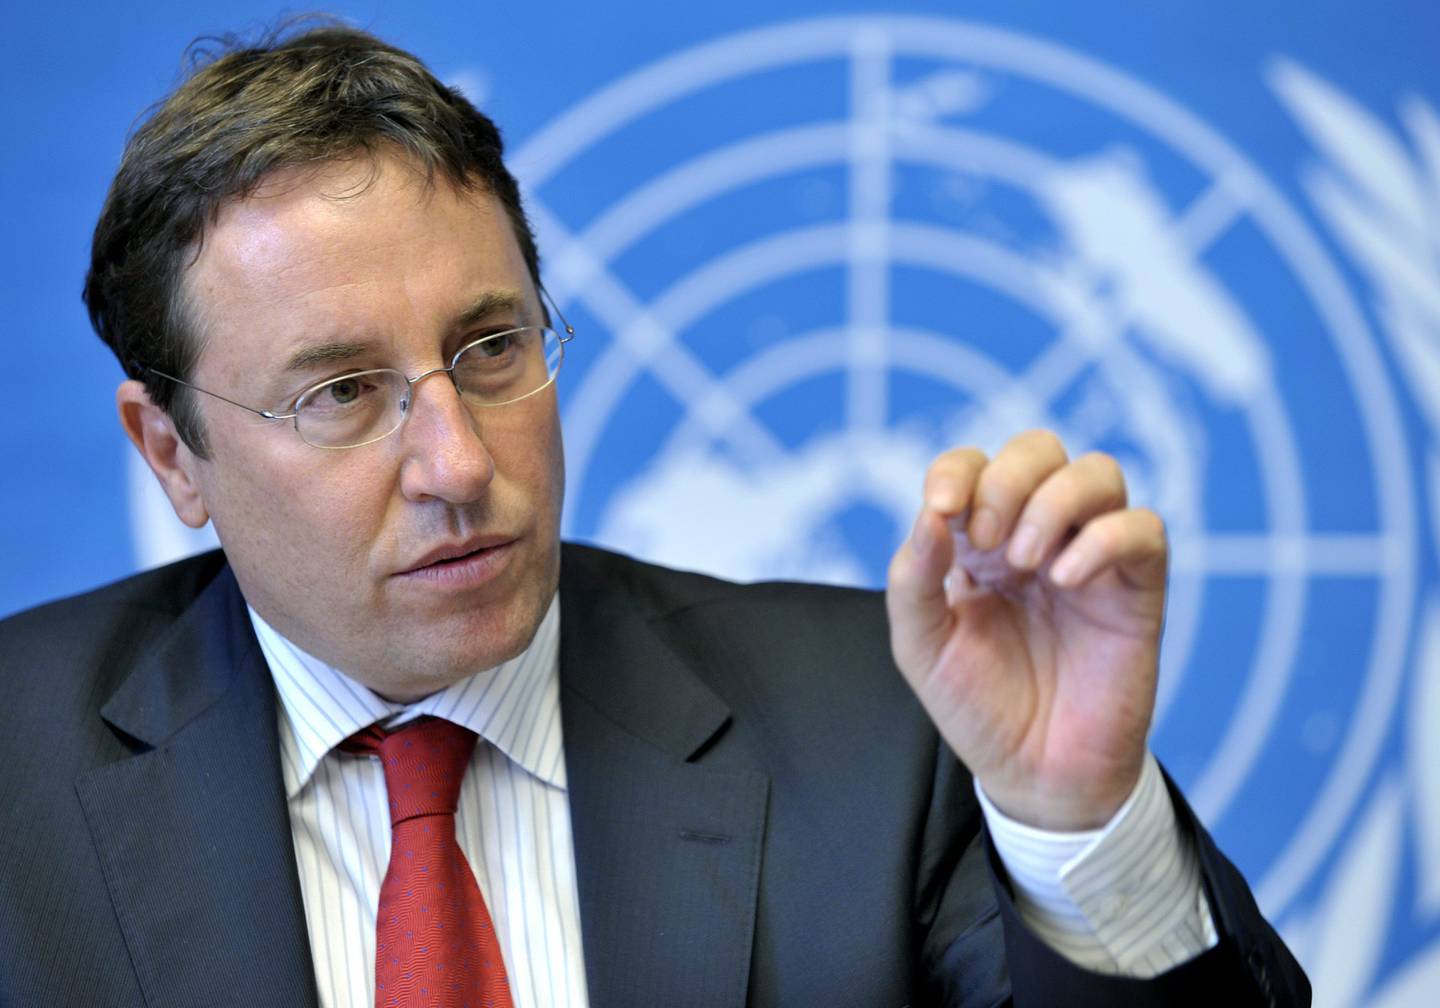 German Achim Steiner, Under-Secretary General and Executive Director of the UN Environment Programme (UNEP),  speaks during a press briefing about chemicals and Organic Pollutants, at the United Nations building in Geneva, Switzerland, Friday, May 8, 2009. (AP Photo/Keystone, Martial Trezzini)